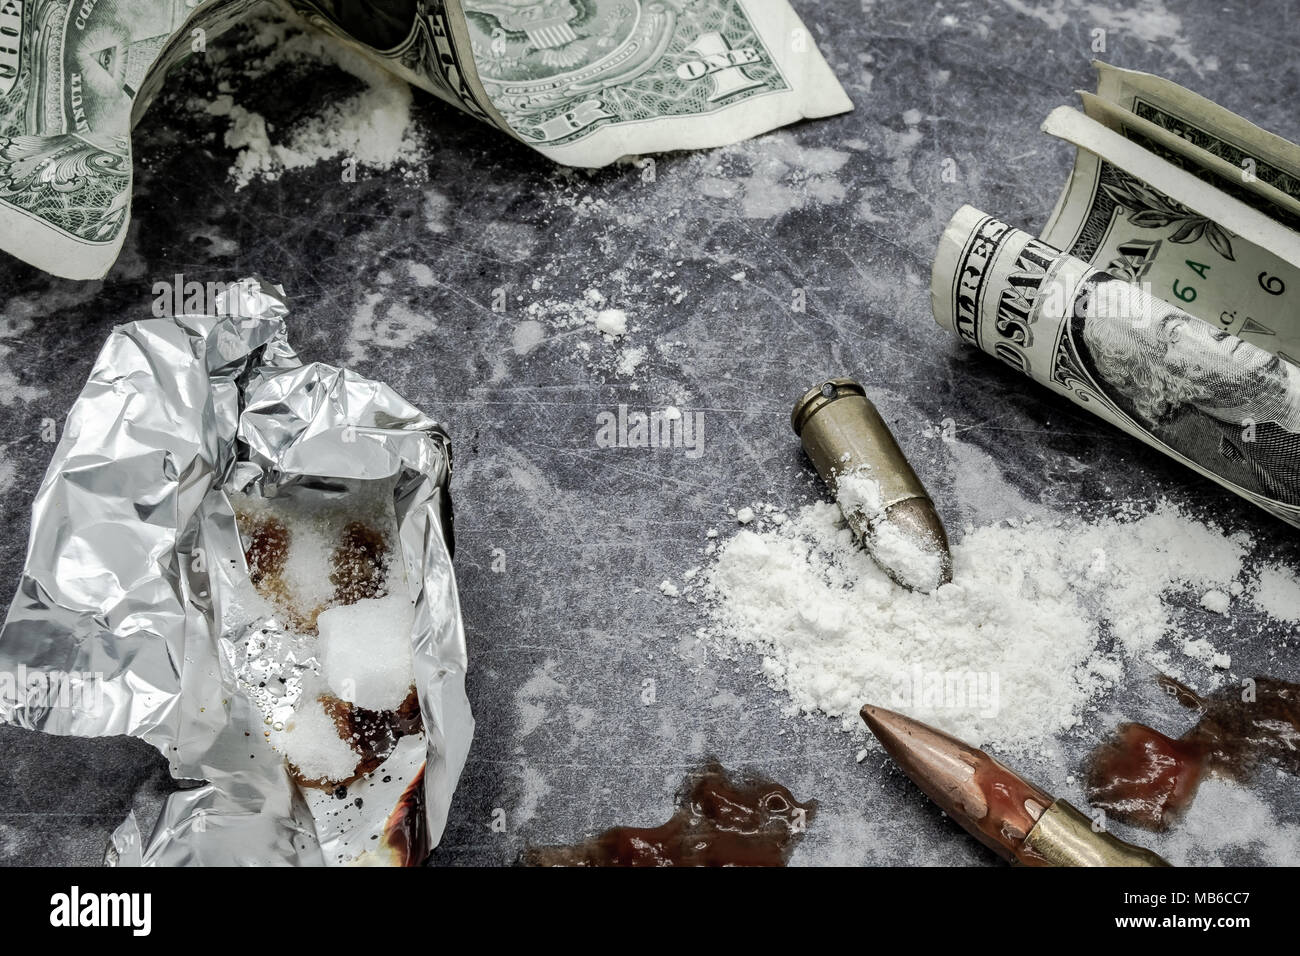 Mock-up concept if illegal drug dealing on a work surface. Showing dollar bills, mock-up bullets together with prop blood together with smoking foil. Stock Photo